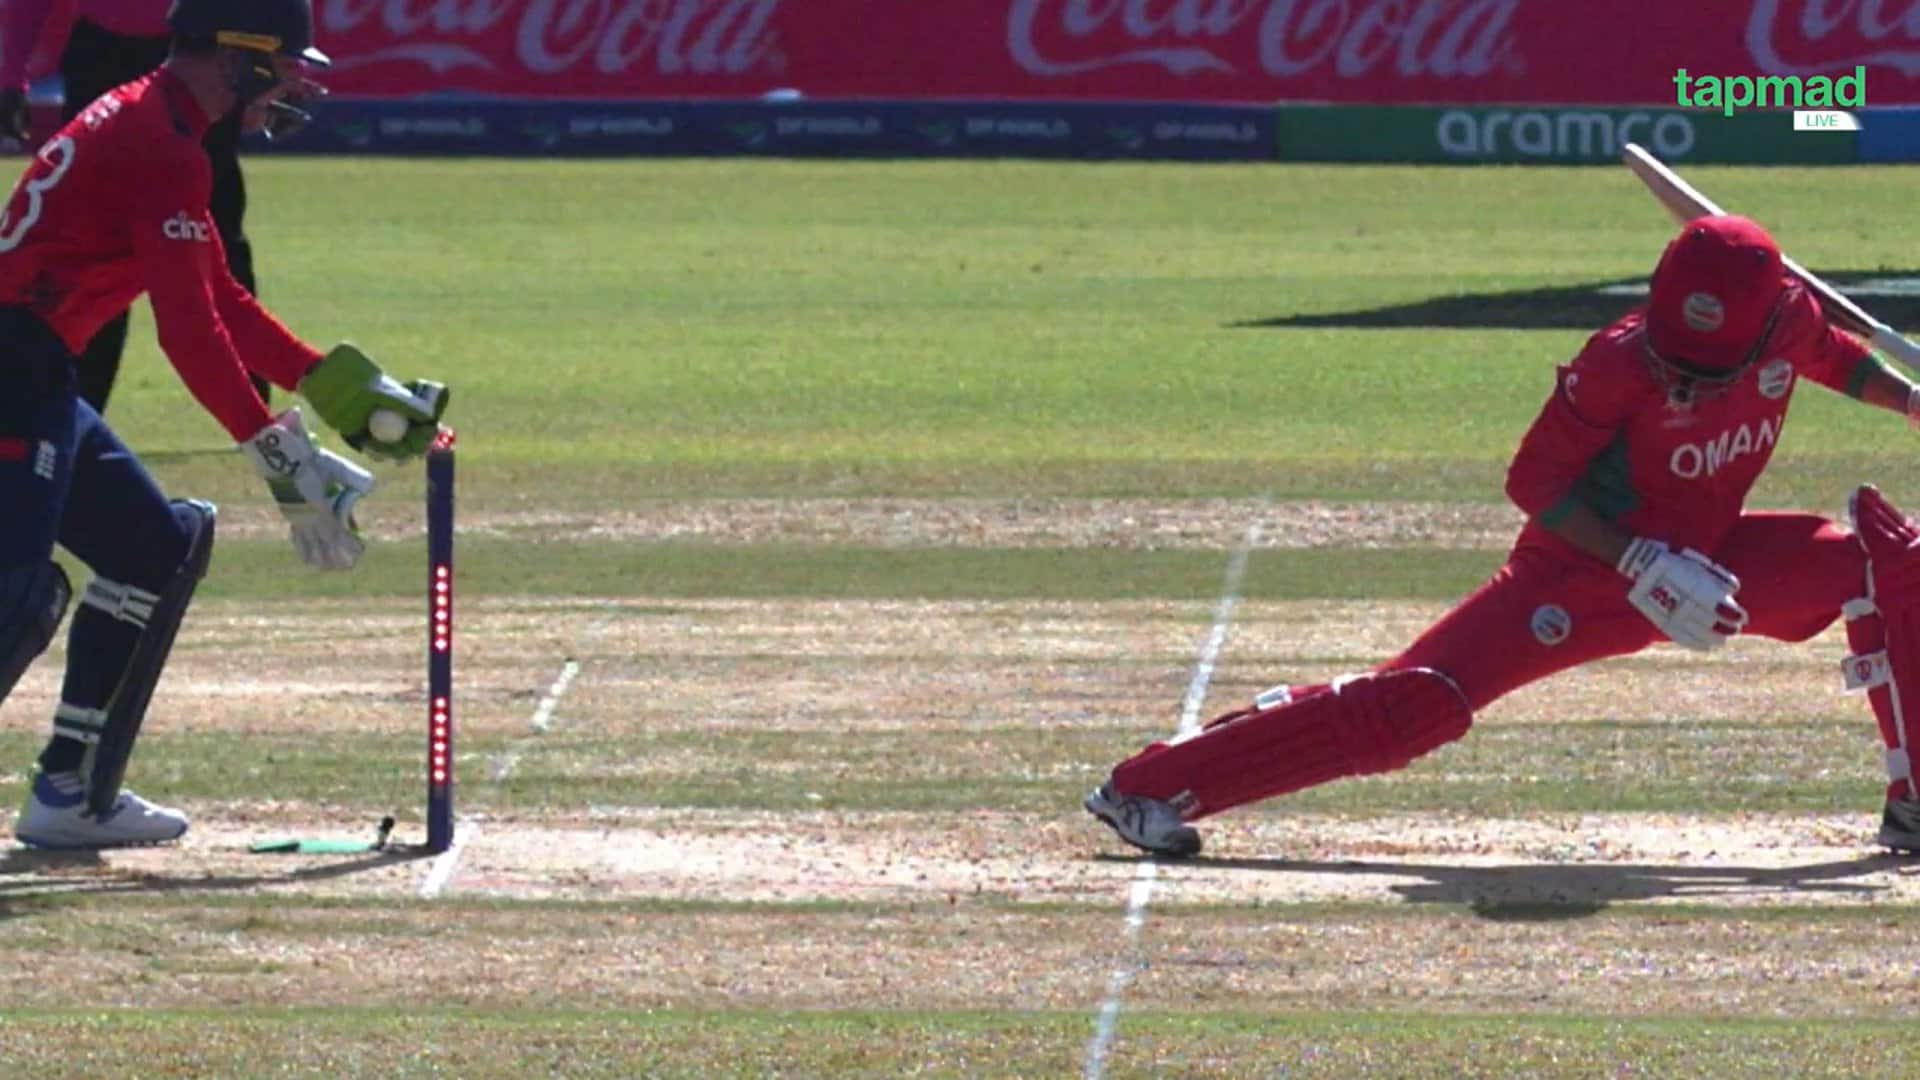 Buttler with an MS Dhoni style stumping [X]
